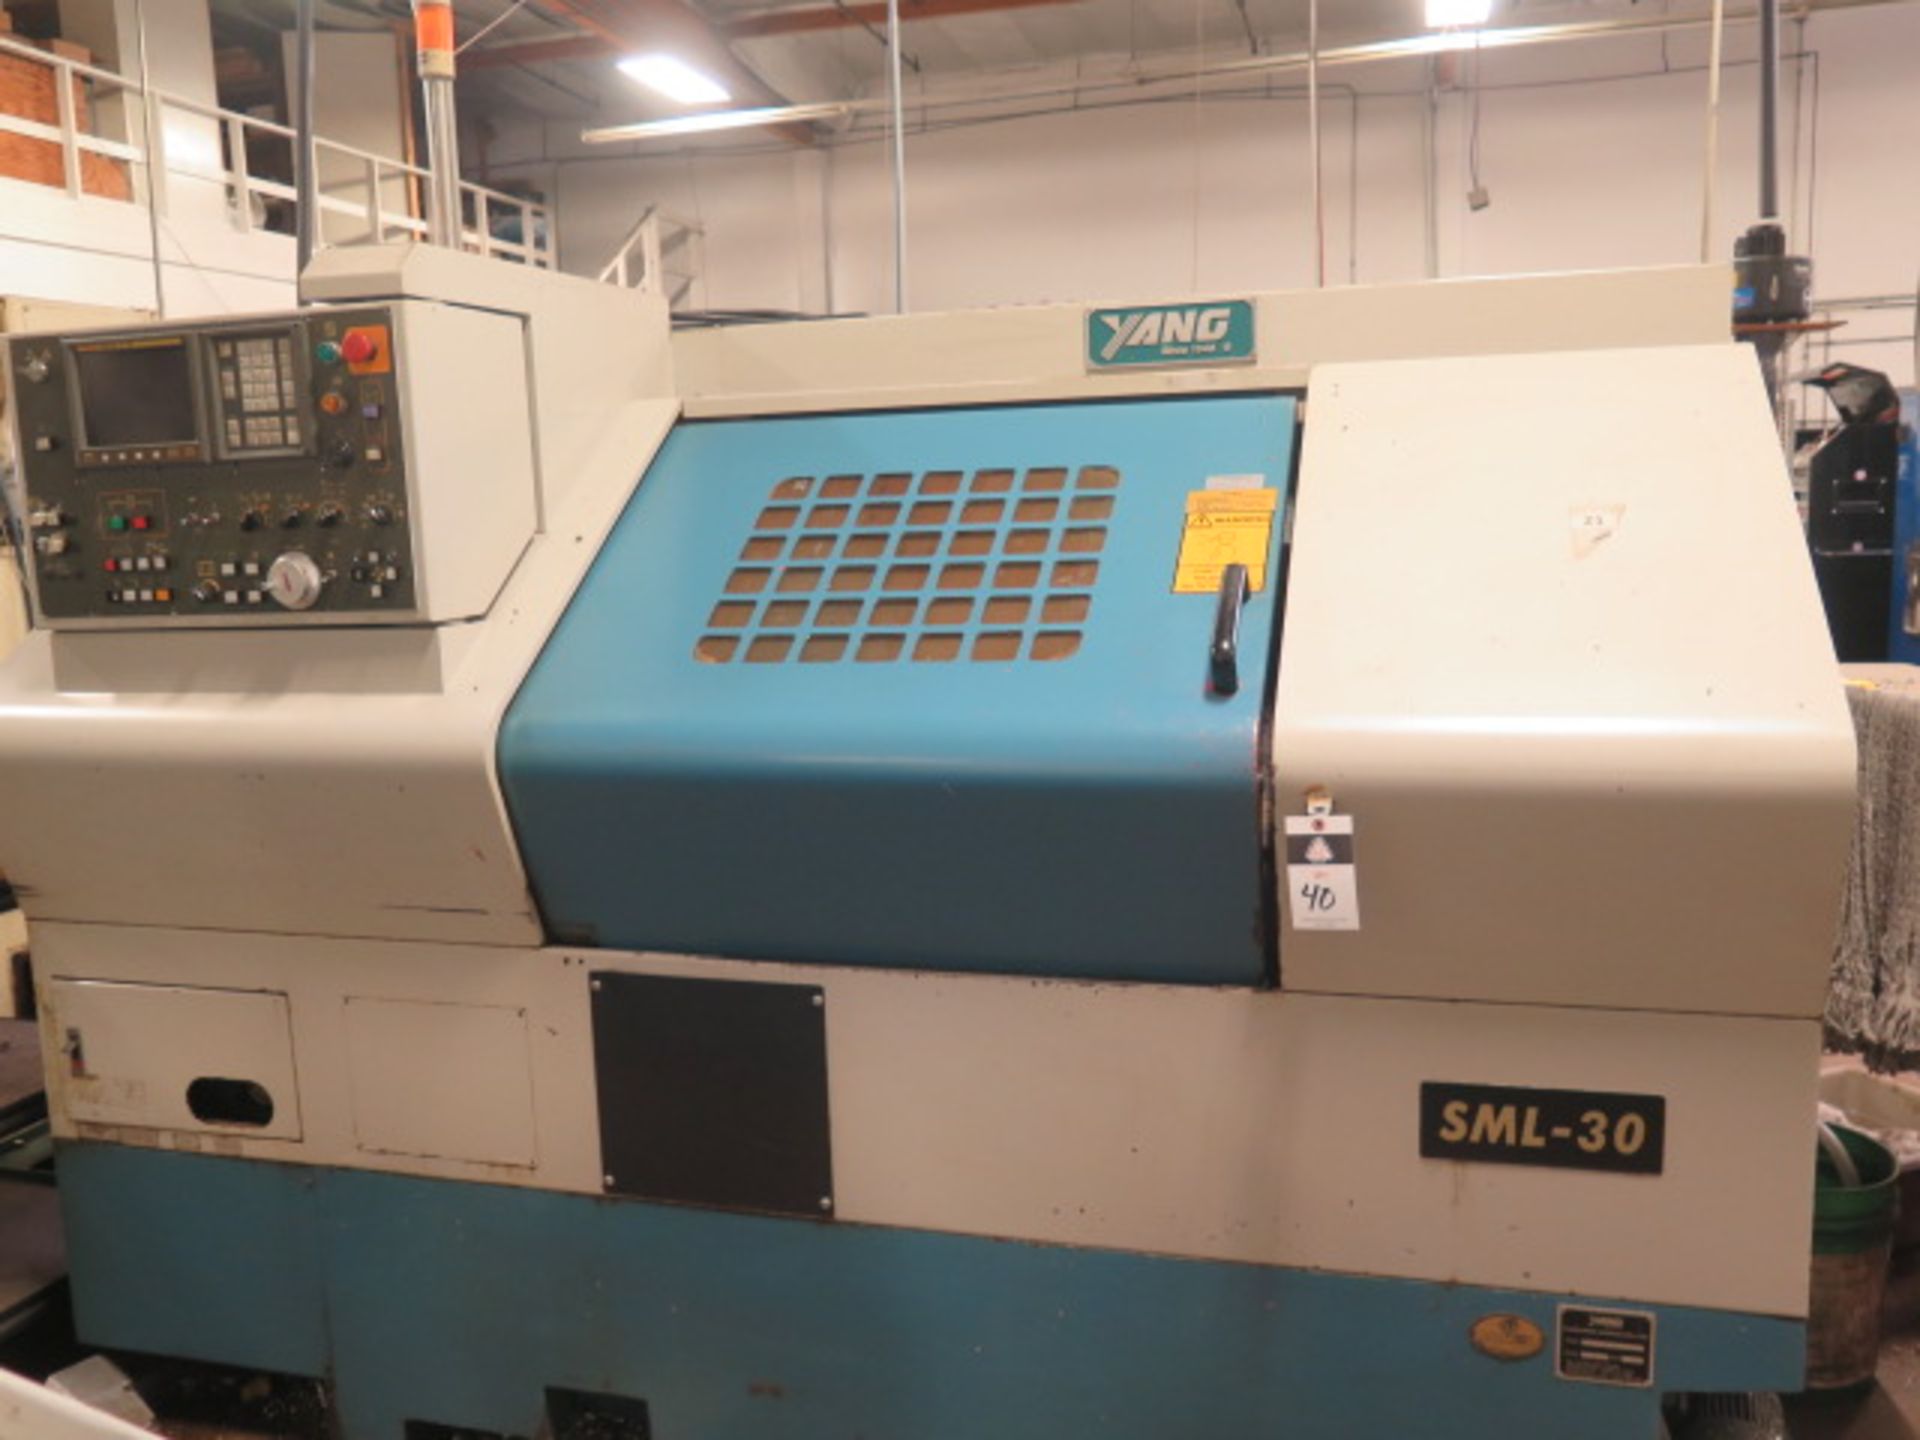 1999 Yang SML-30 CNC Turning Center s/n C20050 w/ Fanuc 0i-TD Controls, 8-Station Turret, SOLD AS IS